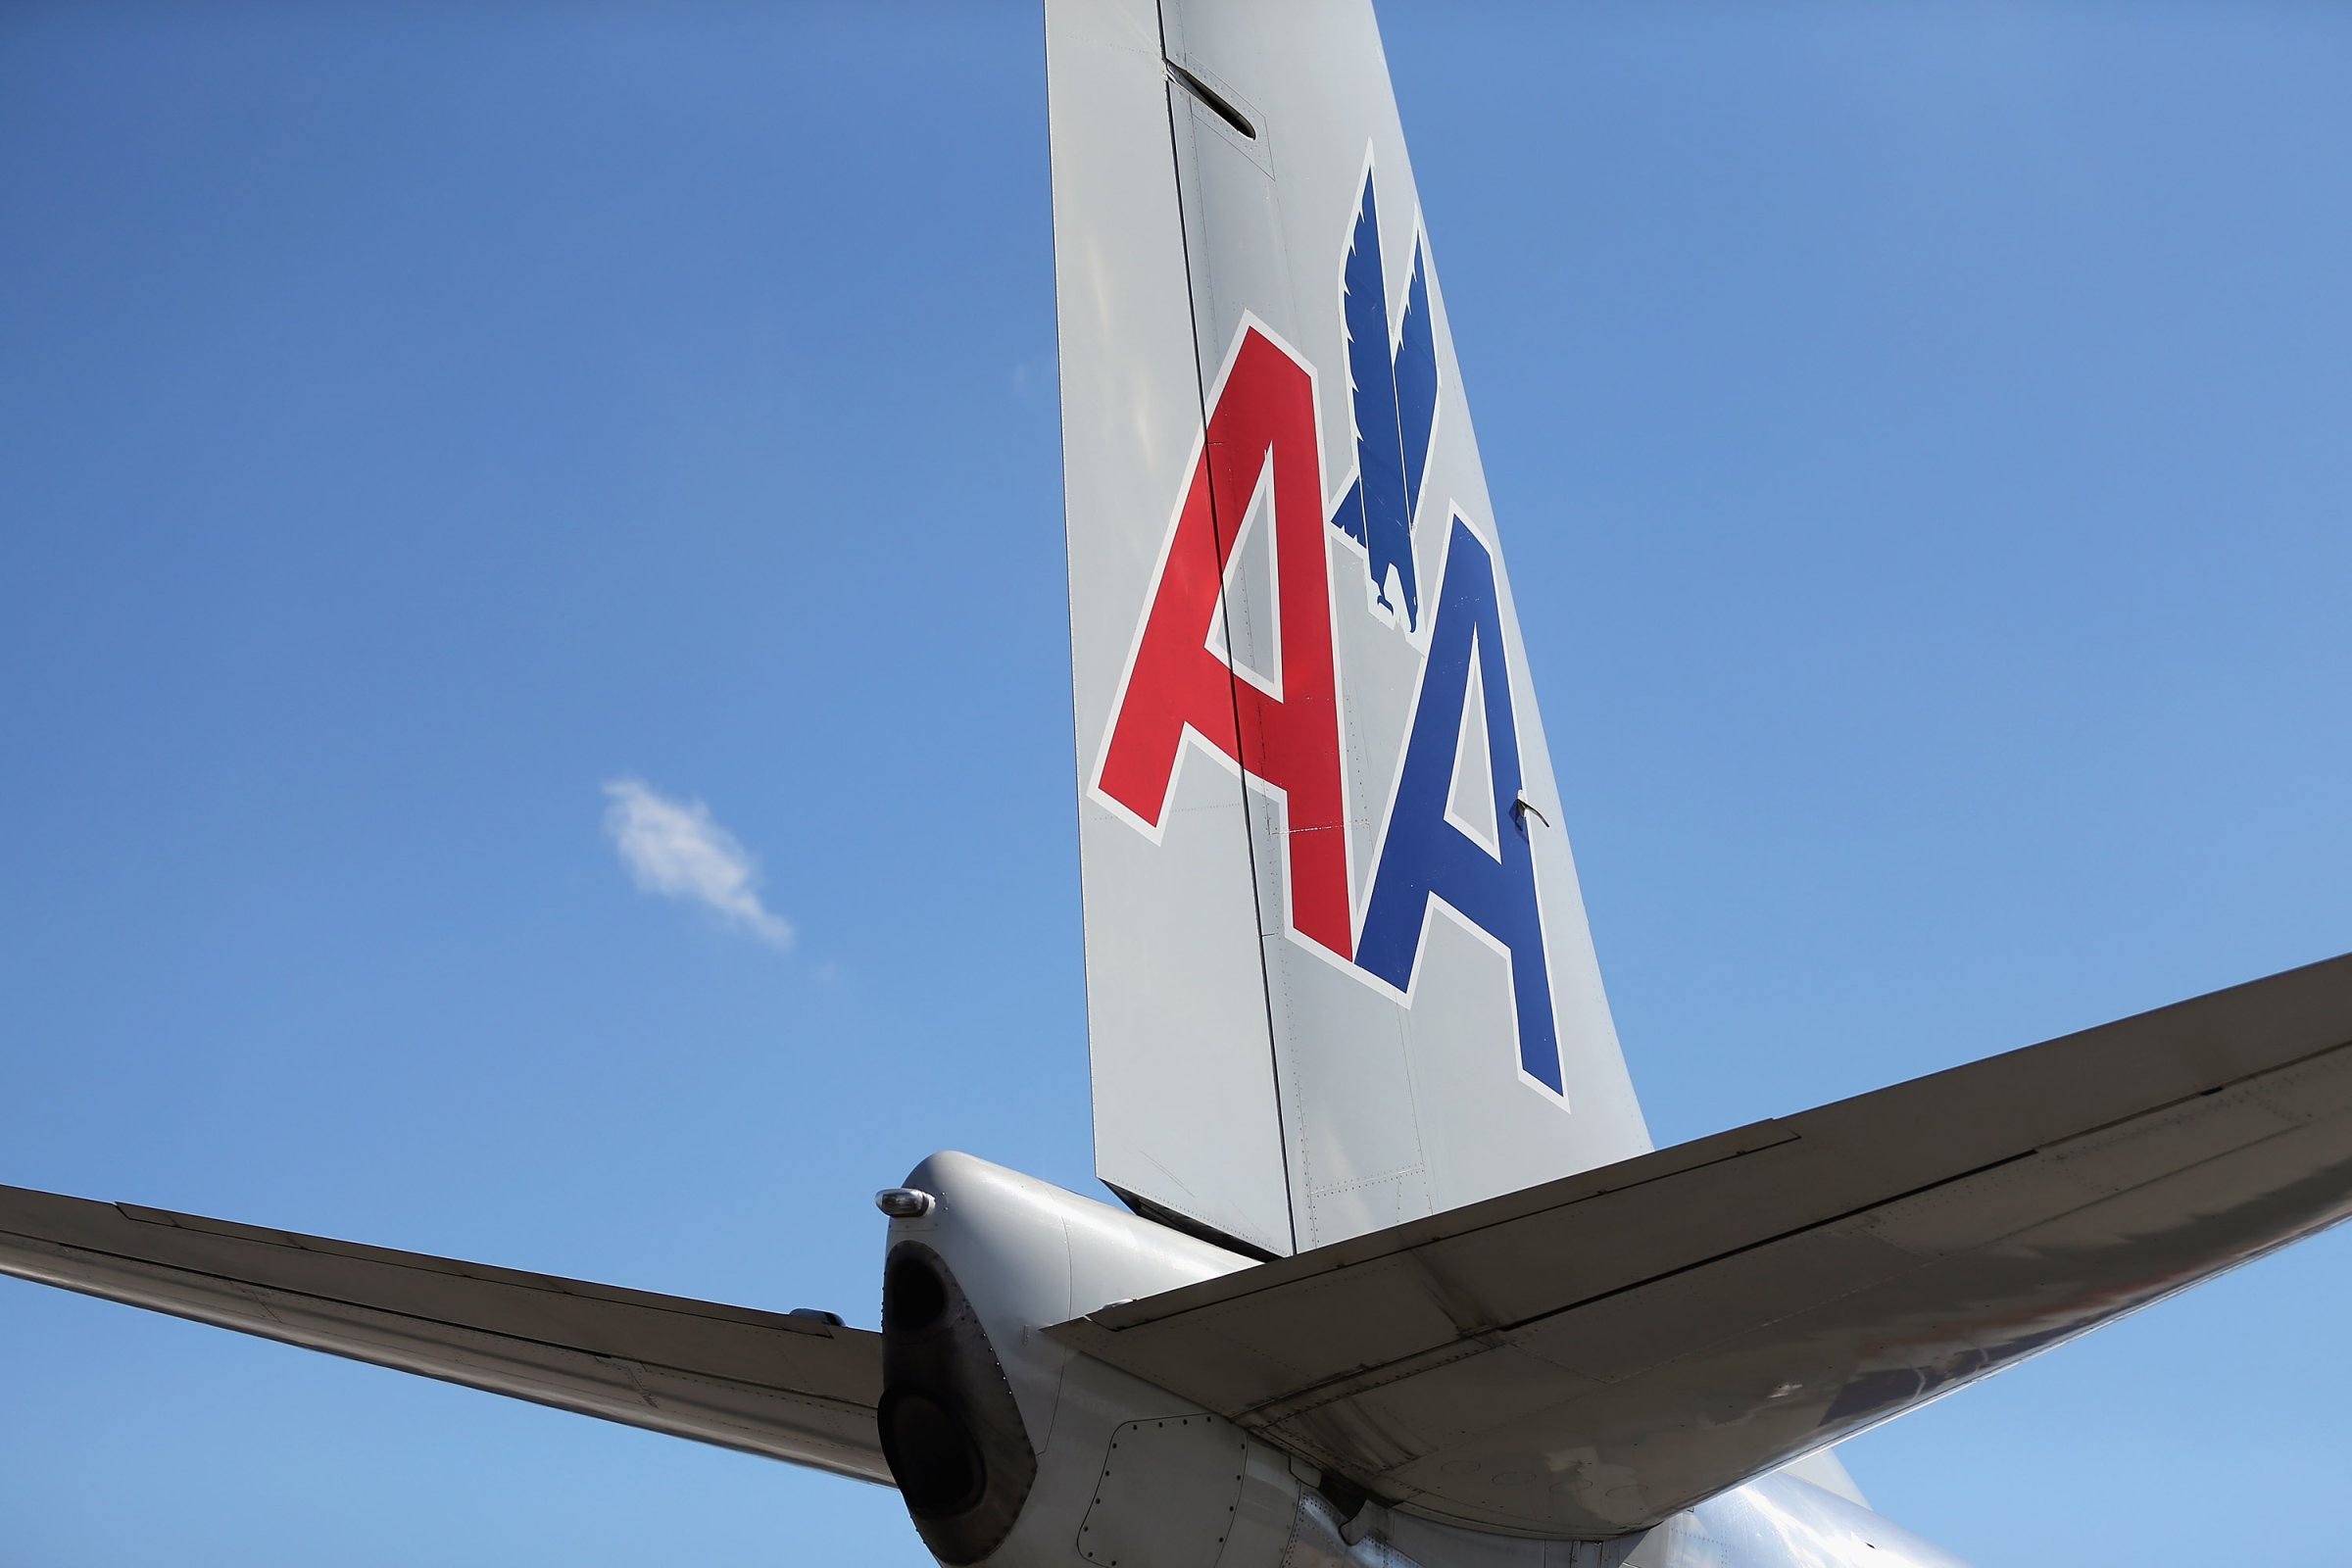 An American Airlines plane is seen at the Miami International Airport on Feb. 7, 2013 in Miami.